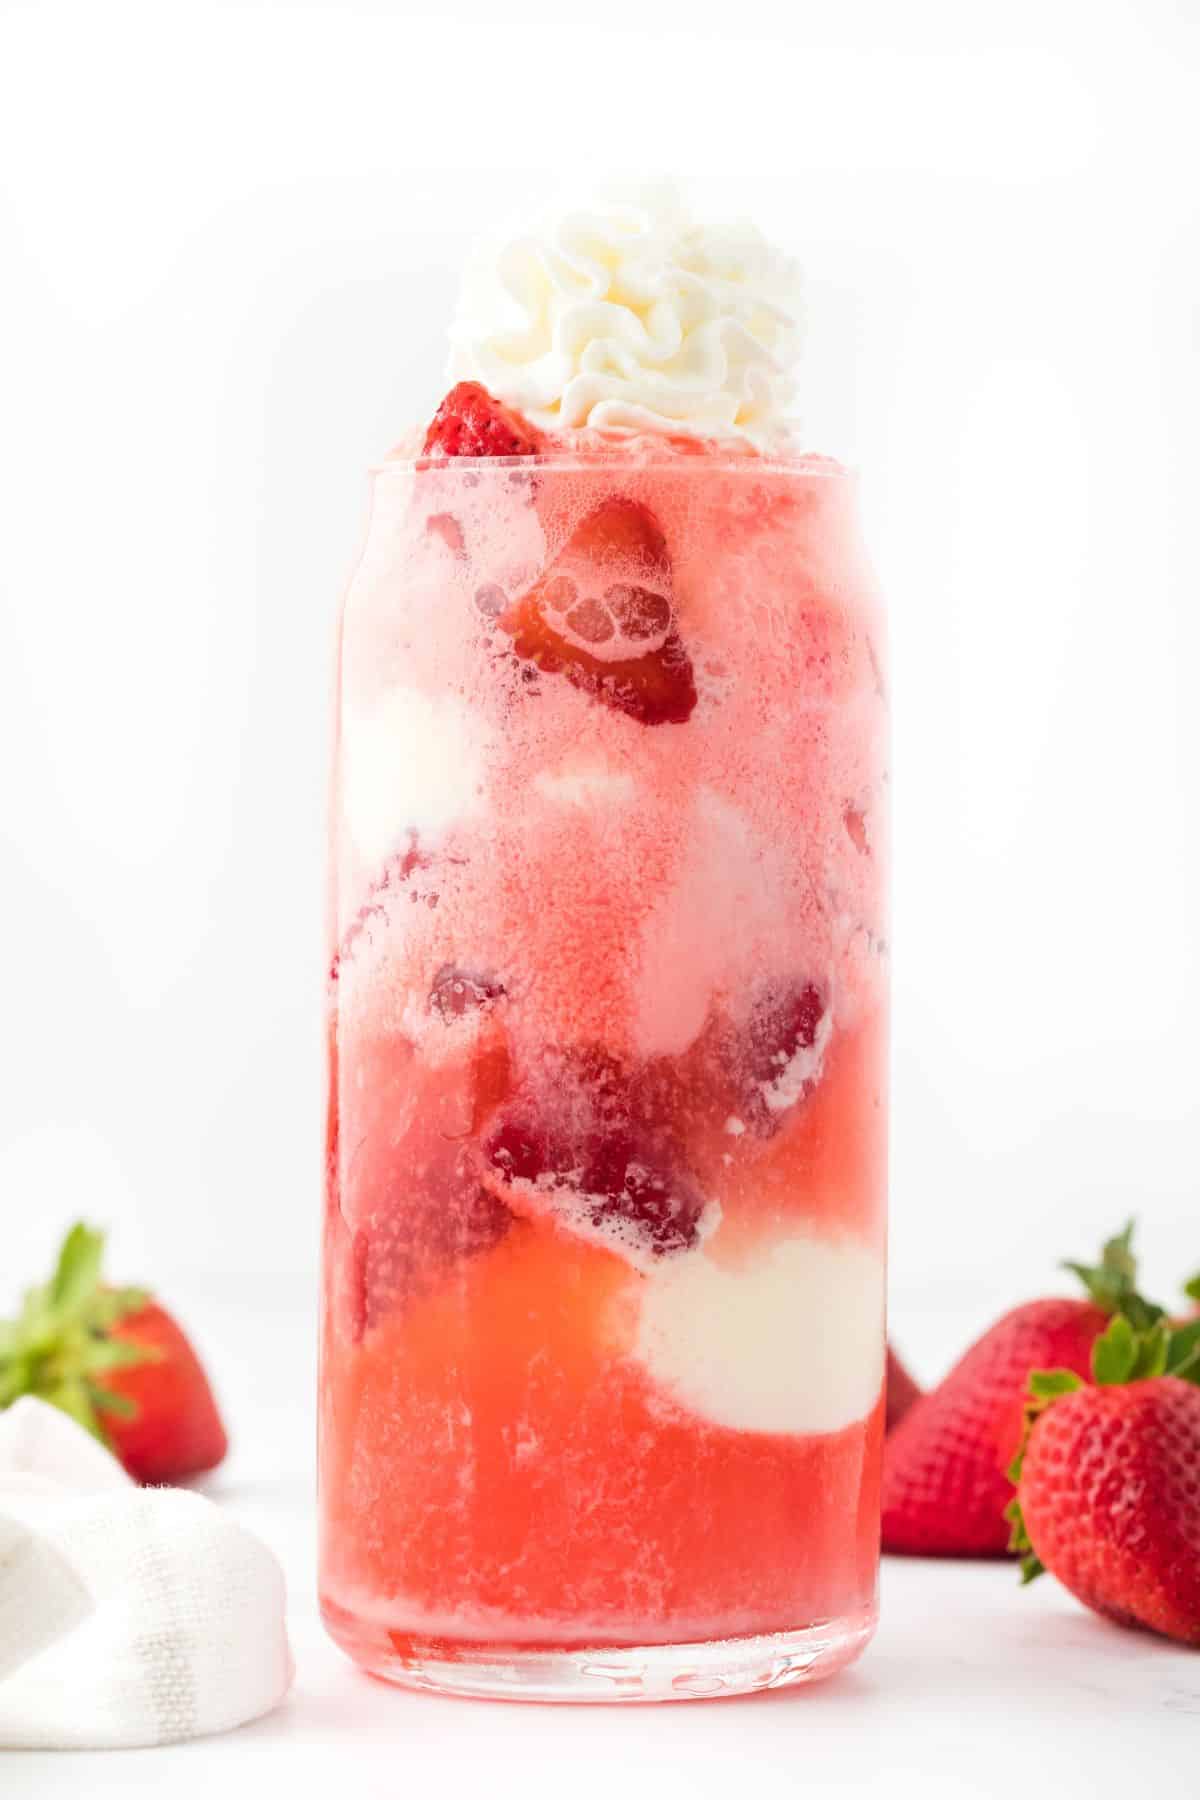 A strawberry float on a table surrounded by whole strawberries.